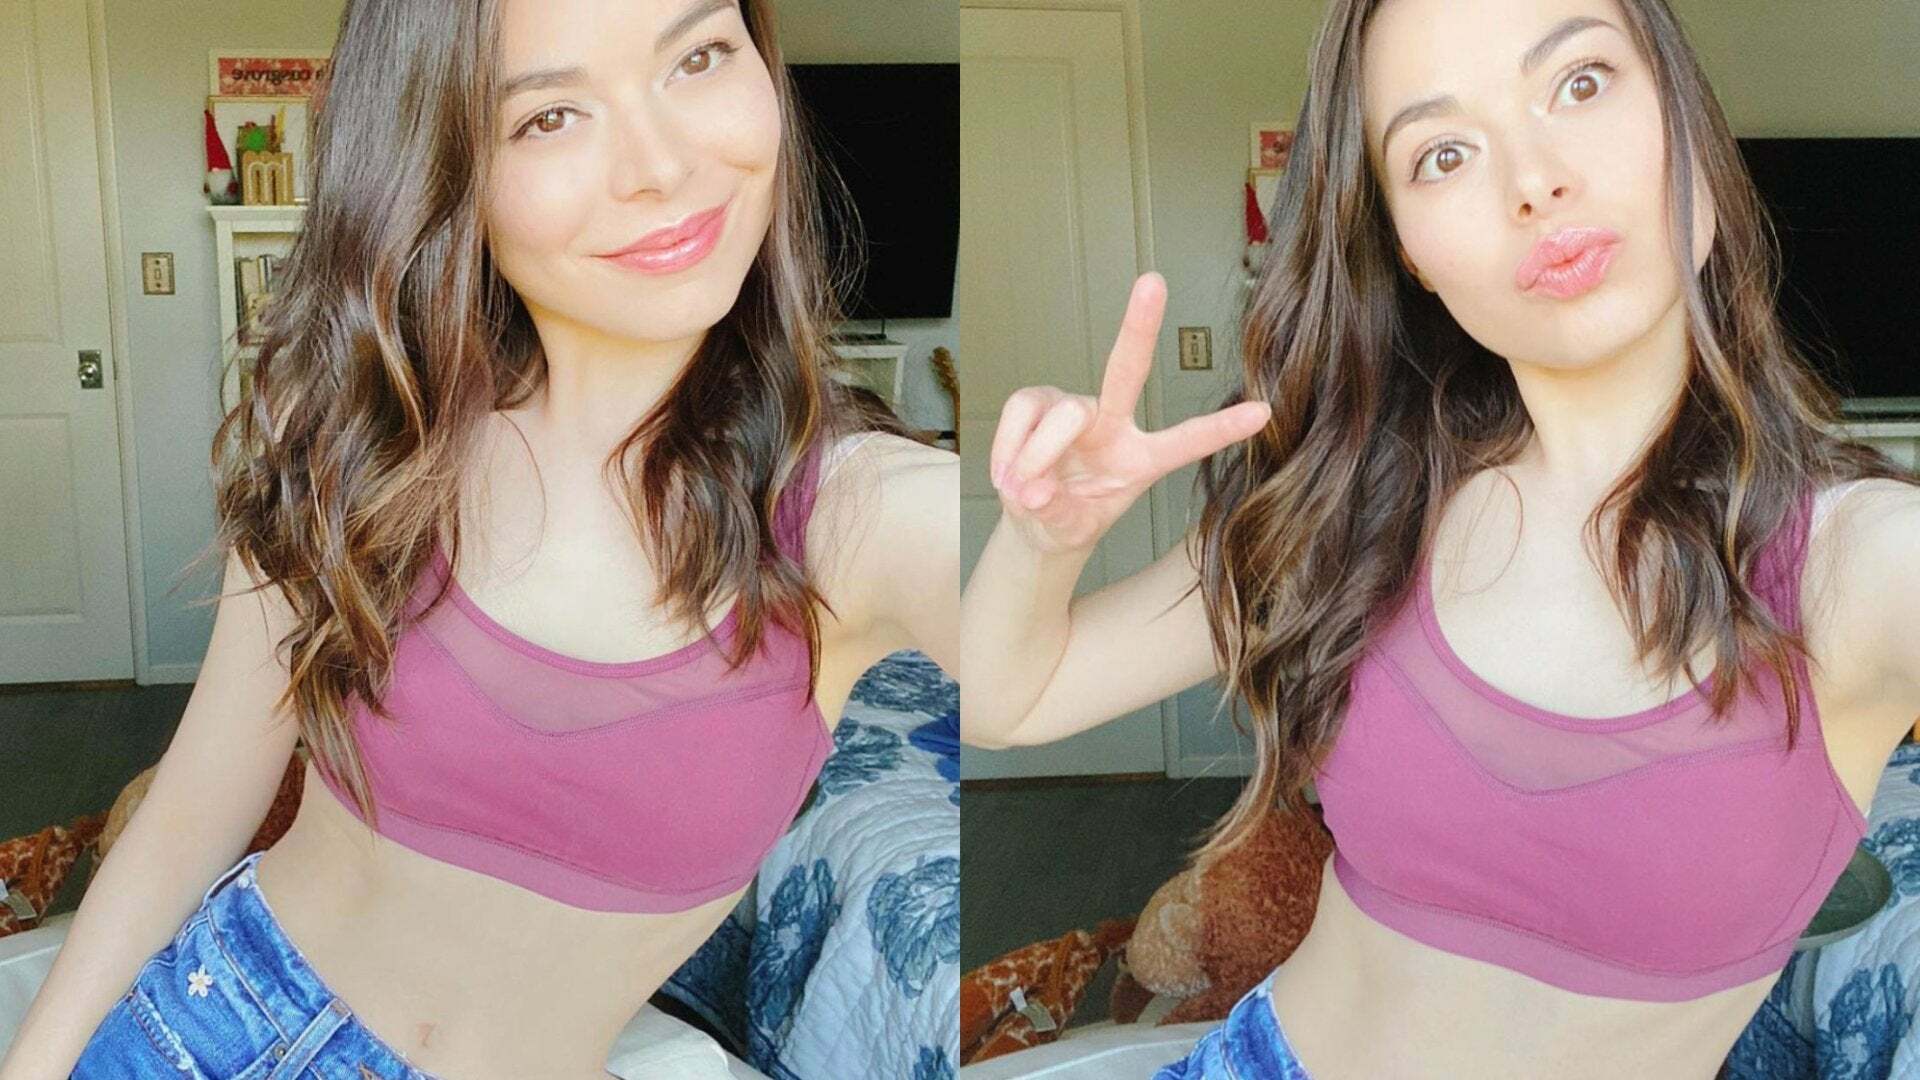 how would you fuck Miranda Cosgrove and where would you shoot your cum